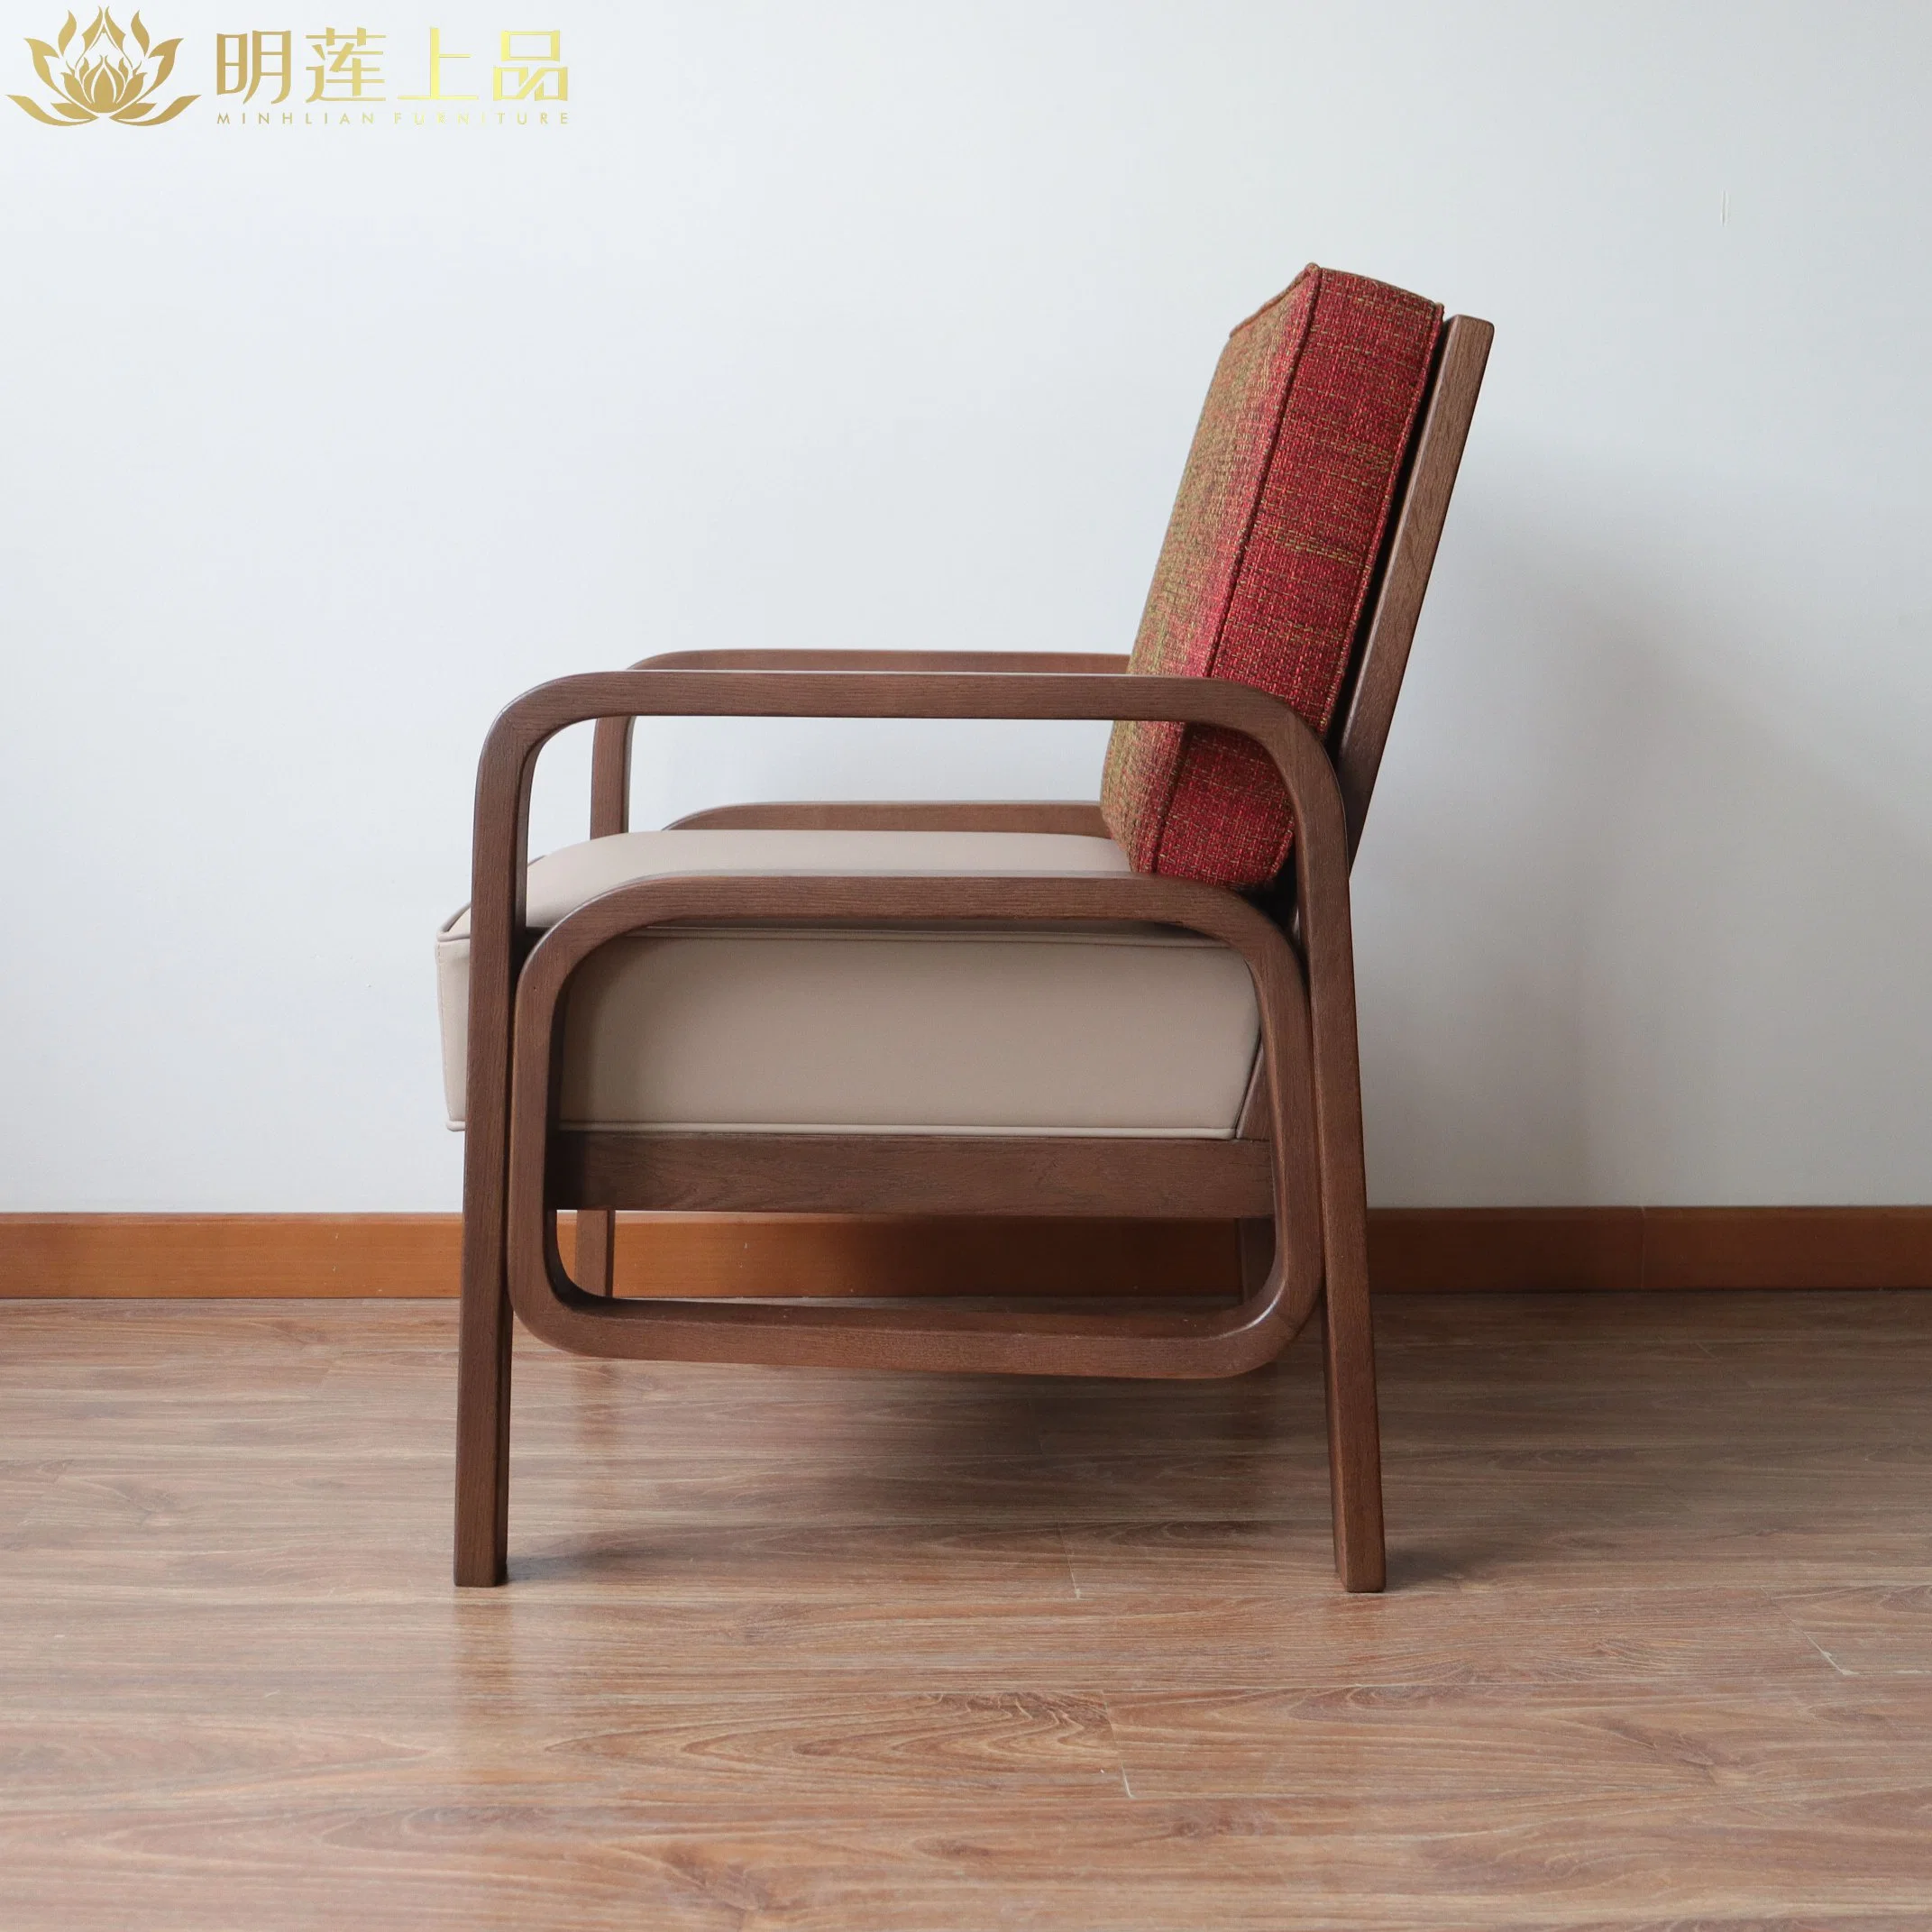 Modern Design Solid Wood Living Room Chair Home Furniture Hotel Furniture Fabric Upholstered Lounge Leisure Rest Wooden Chair